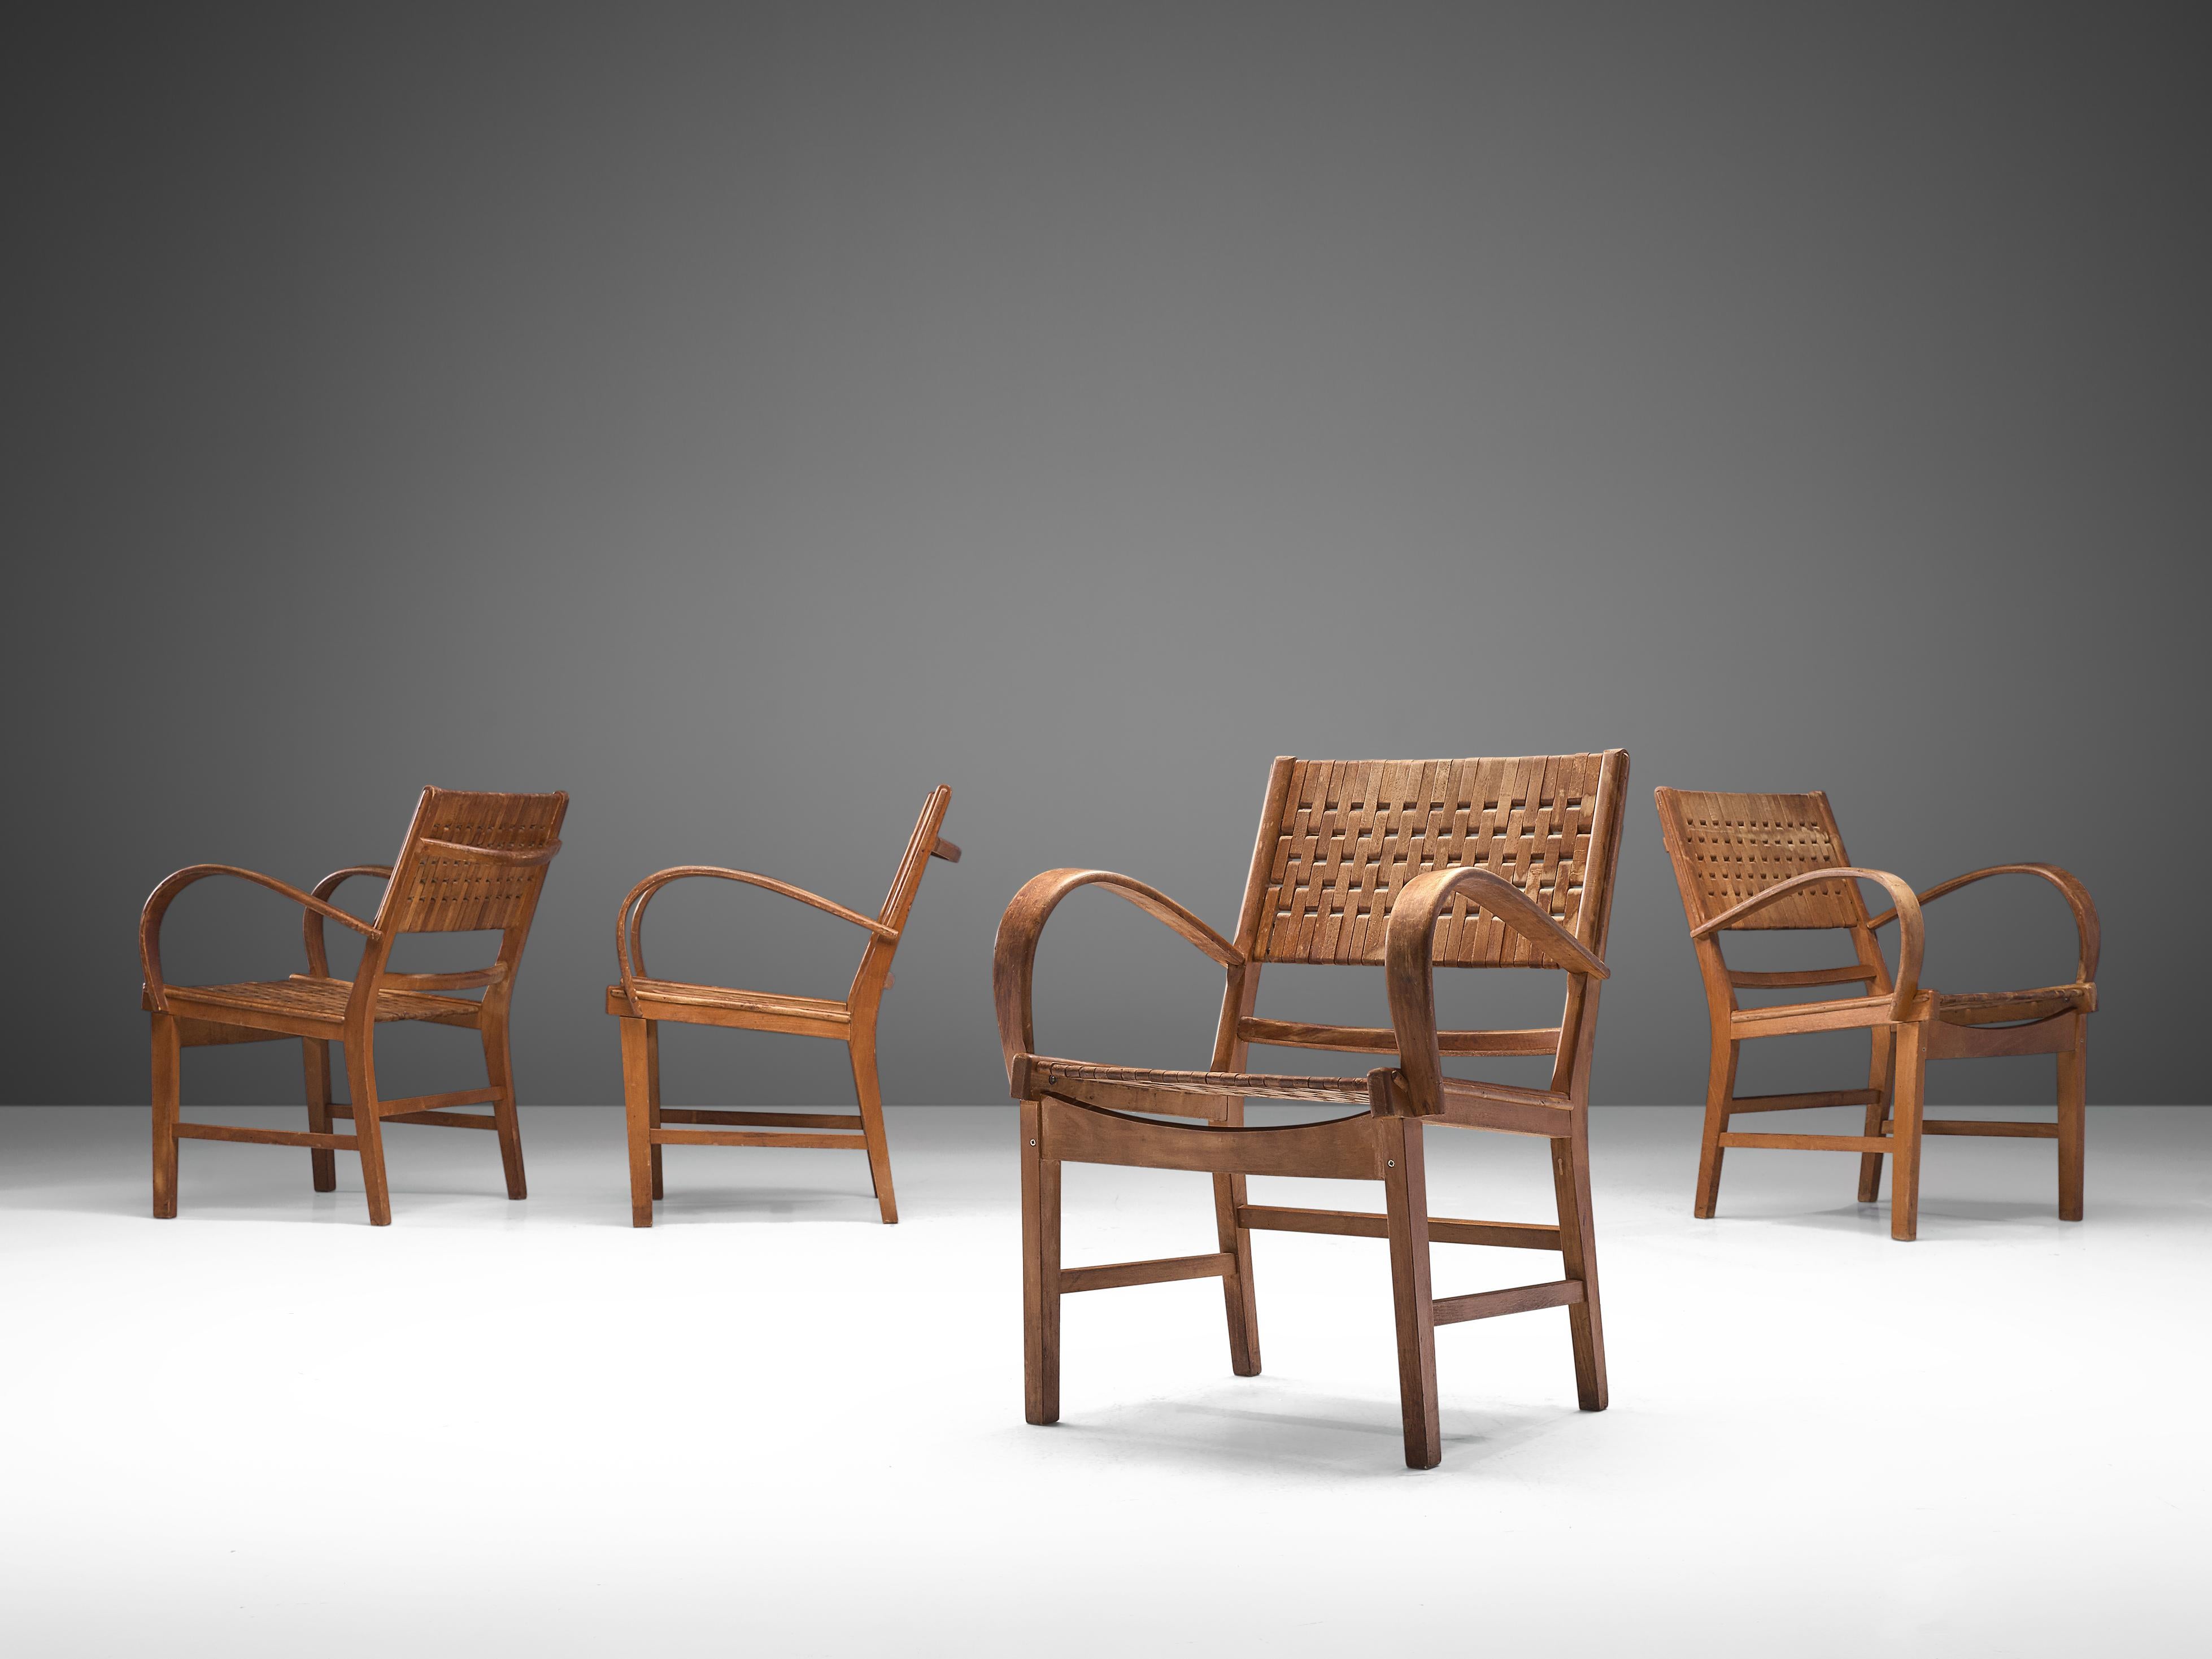 Erich Dieckmann for Gelenka DDP, armchair, beech bentwood, Germany, 1930s

This rare armchair is designed by one of the most prominent furniture designers at the Bauhaus named Erich Dieckmann (1896-1944). The design features a stable construction